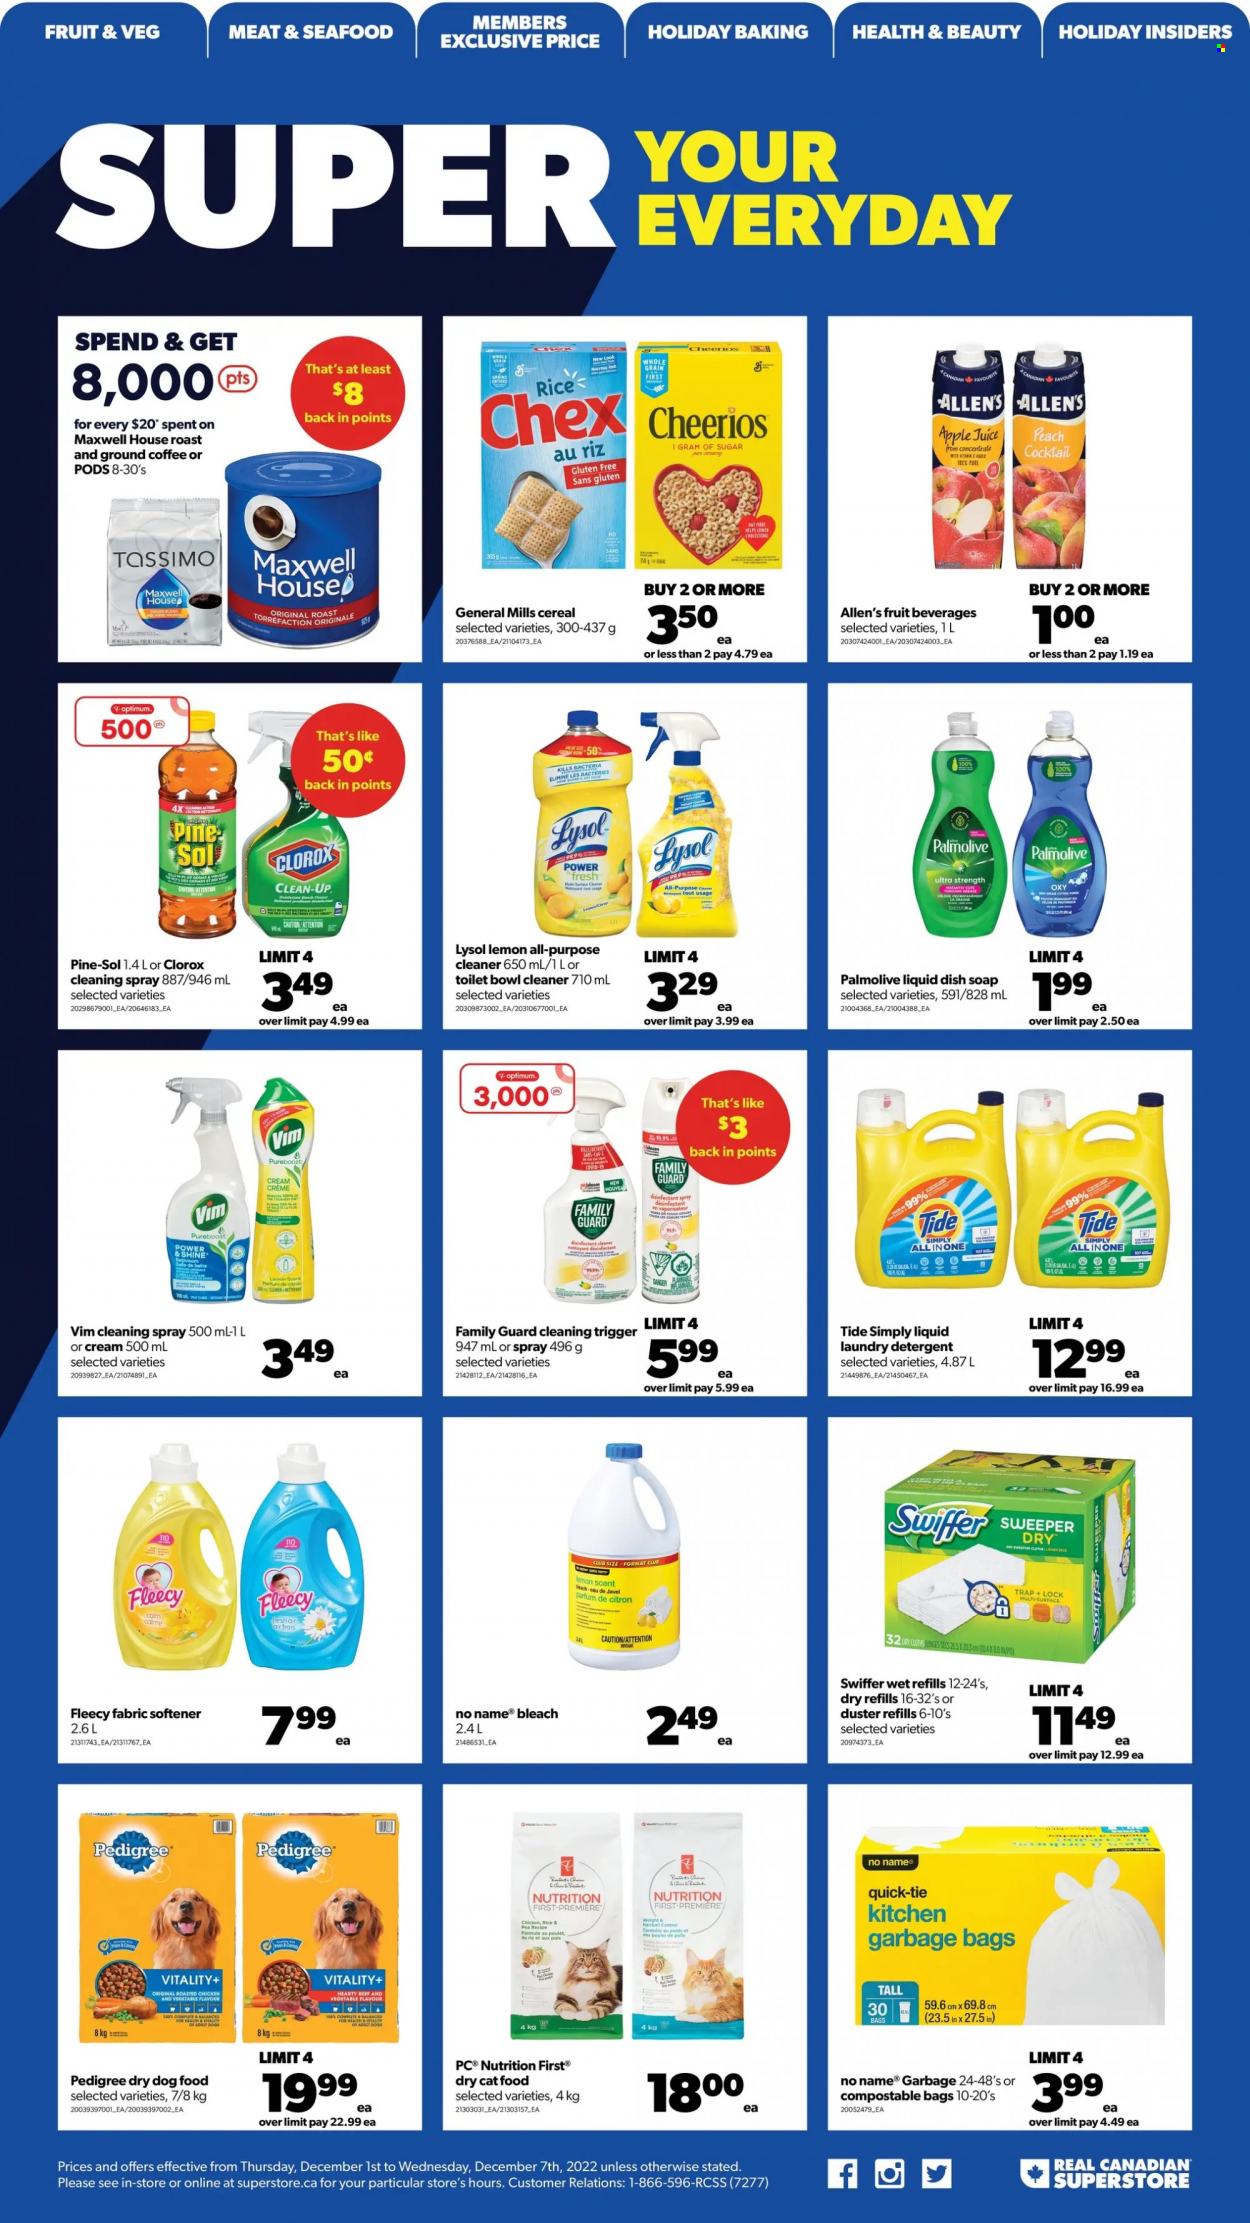 thumbnail - Real Canadian Superstore Flyer - December 01, 2022 - December 07, 2022 - Sales products - No Name, chicken roast, sugar, cereals, Cheerios, rice, apple juice, juice, Maxwell House, coffee, ground coffee, surface cleaner, cleaner, bleach, Lysol, Clorox, Pine-Sol, Swiffer, Tide, fabric softener, laundry detergent, Palmolive, soap, eau de parfum, antibacterial spray, bag, duster, animal food, PREMIERE, dry dog food, cat food, dog food, Optimum, Pedigree, dry cat food, Canon, detergent, desinfection. Page 15.